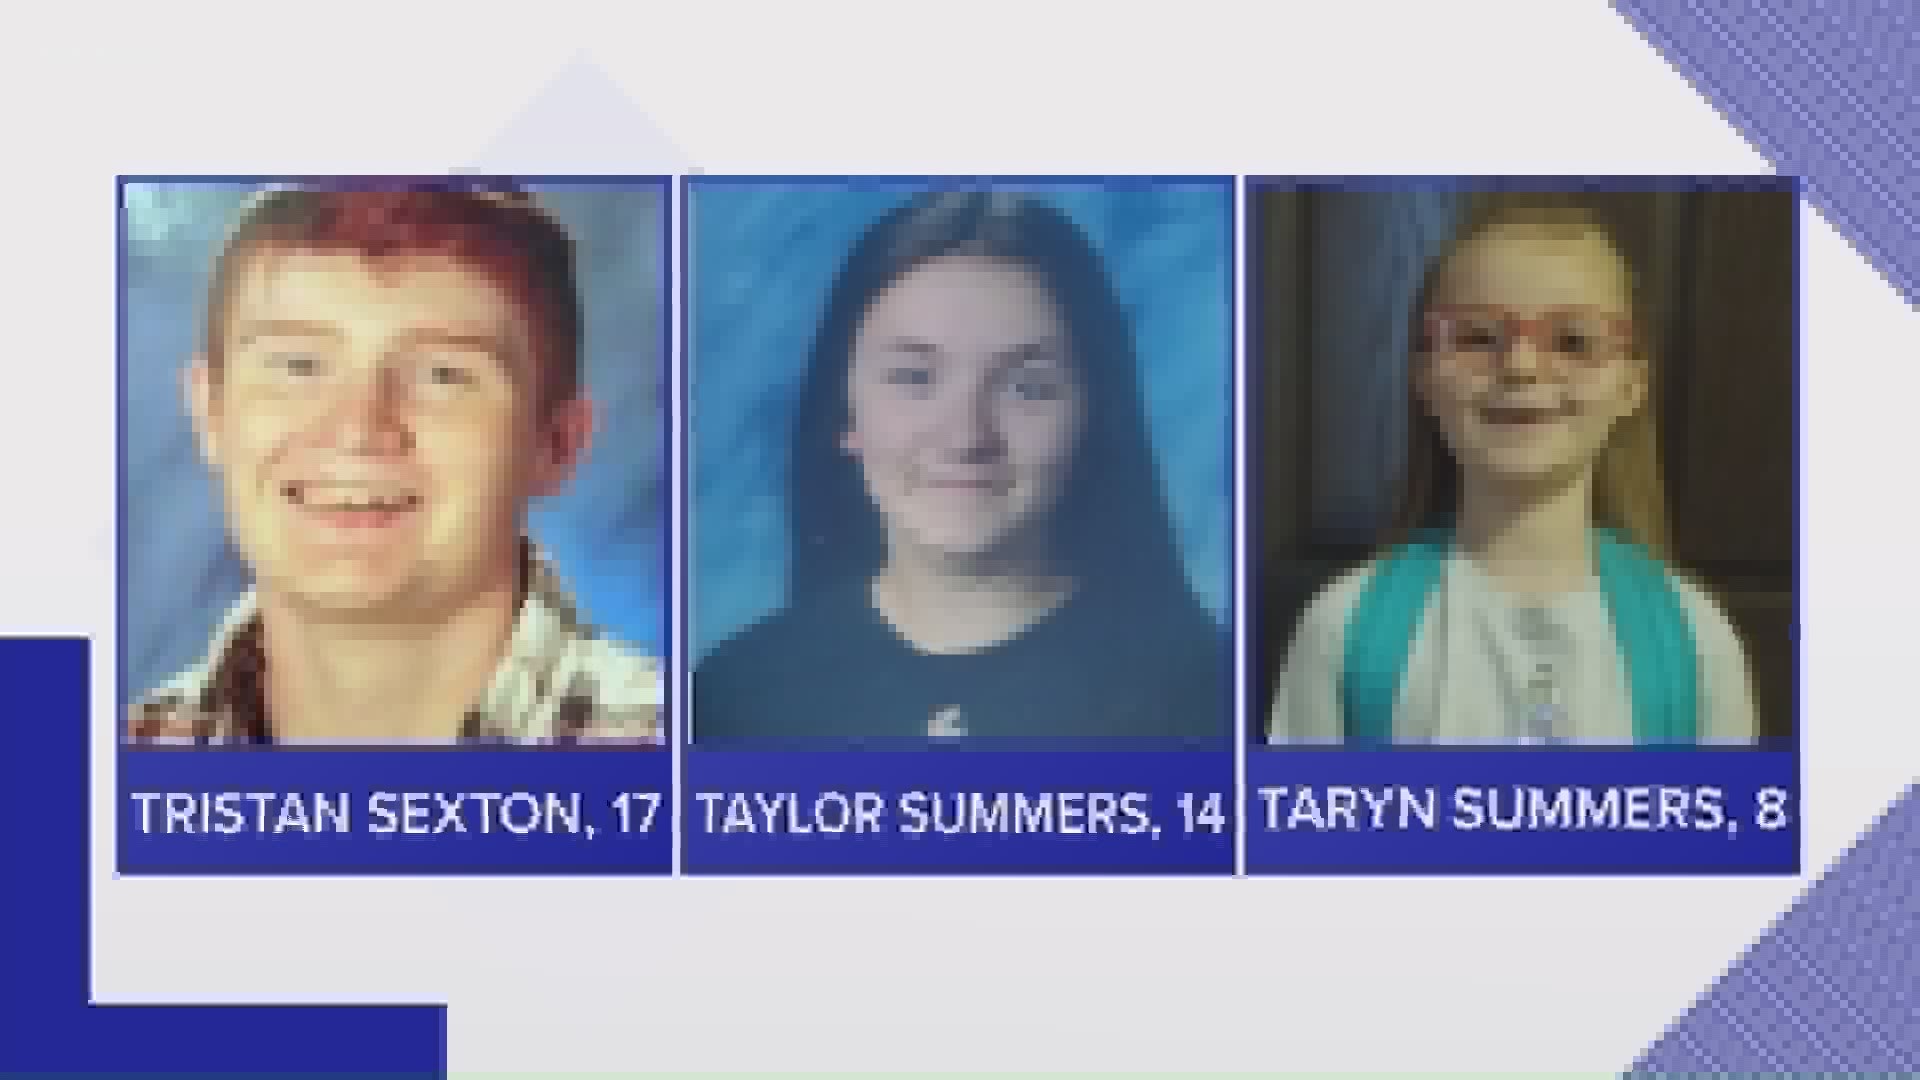 The three were last seen near Airport Road and Highway 52 in Emmett, according to a Facebook post from the sheriff's office.